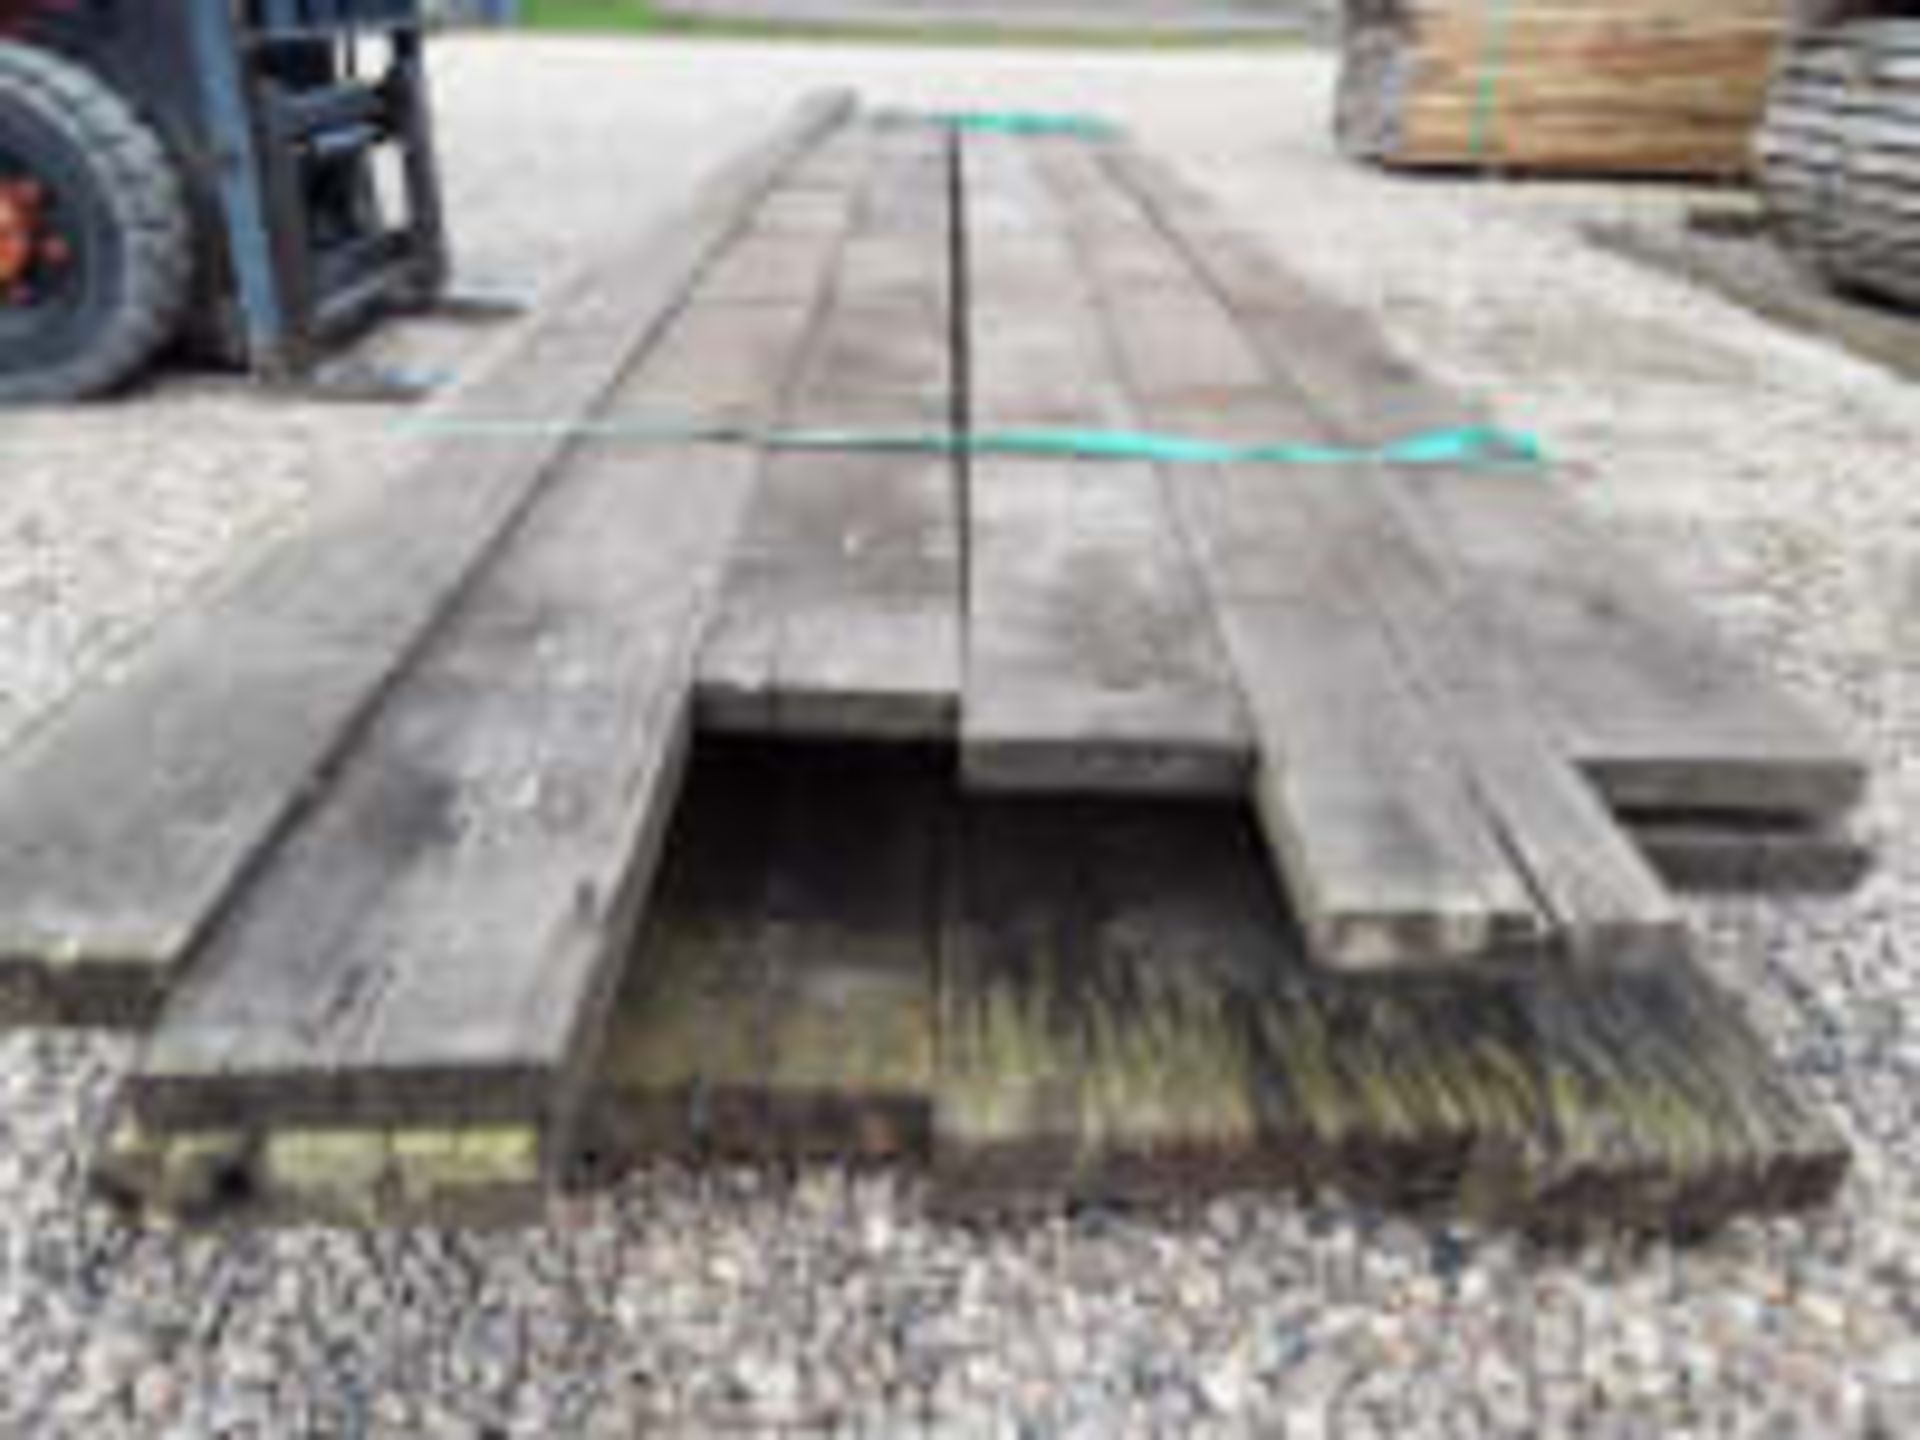 18 x Hardwood Air Dried Sawn Timber English Oak Square Edged Boards / Slabs - Image 2 of 8